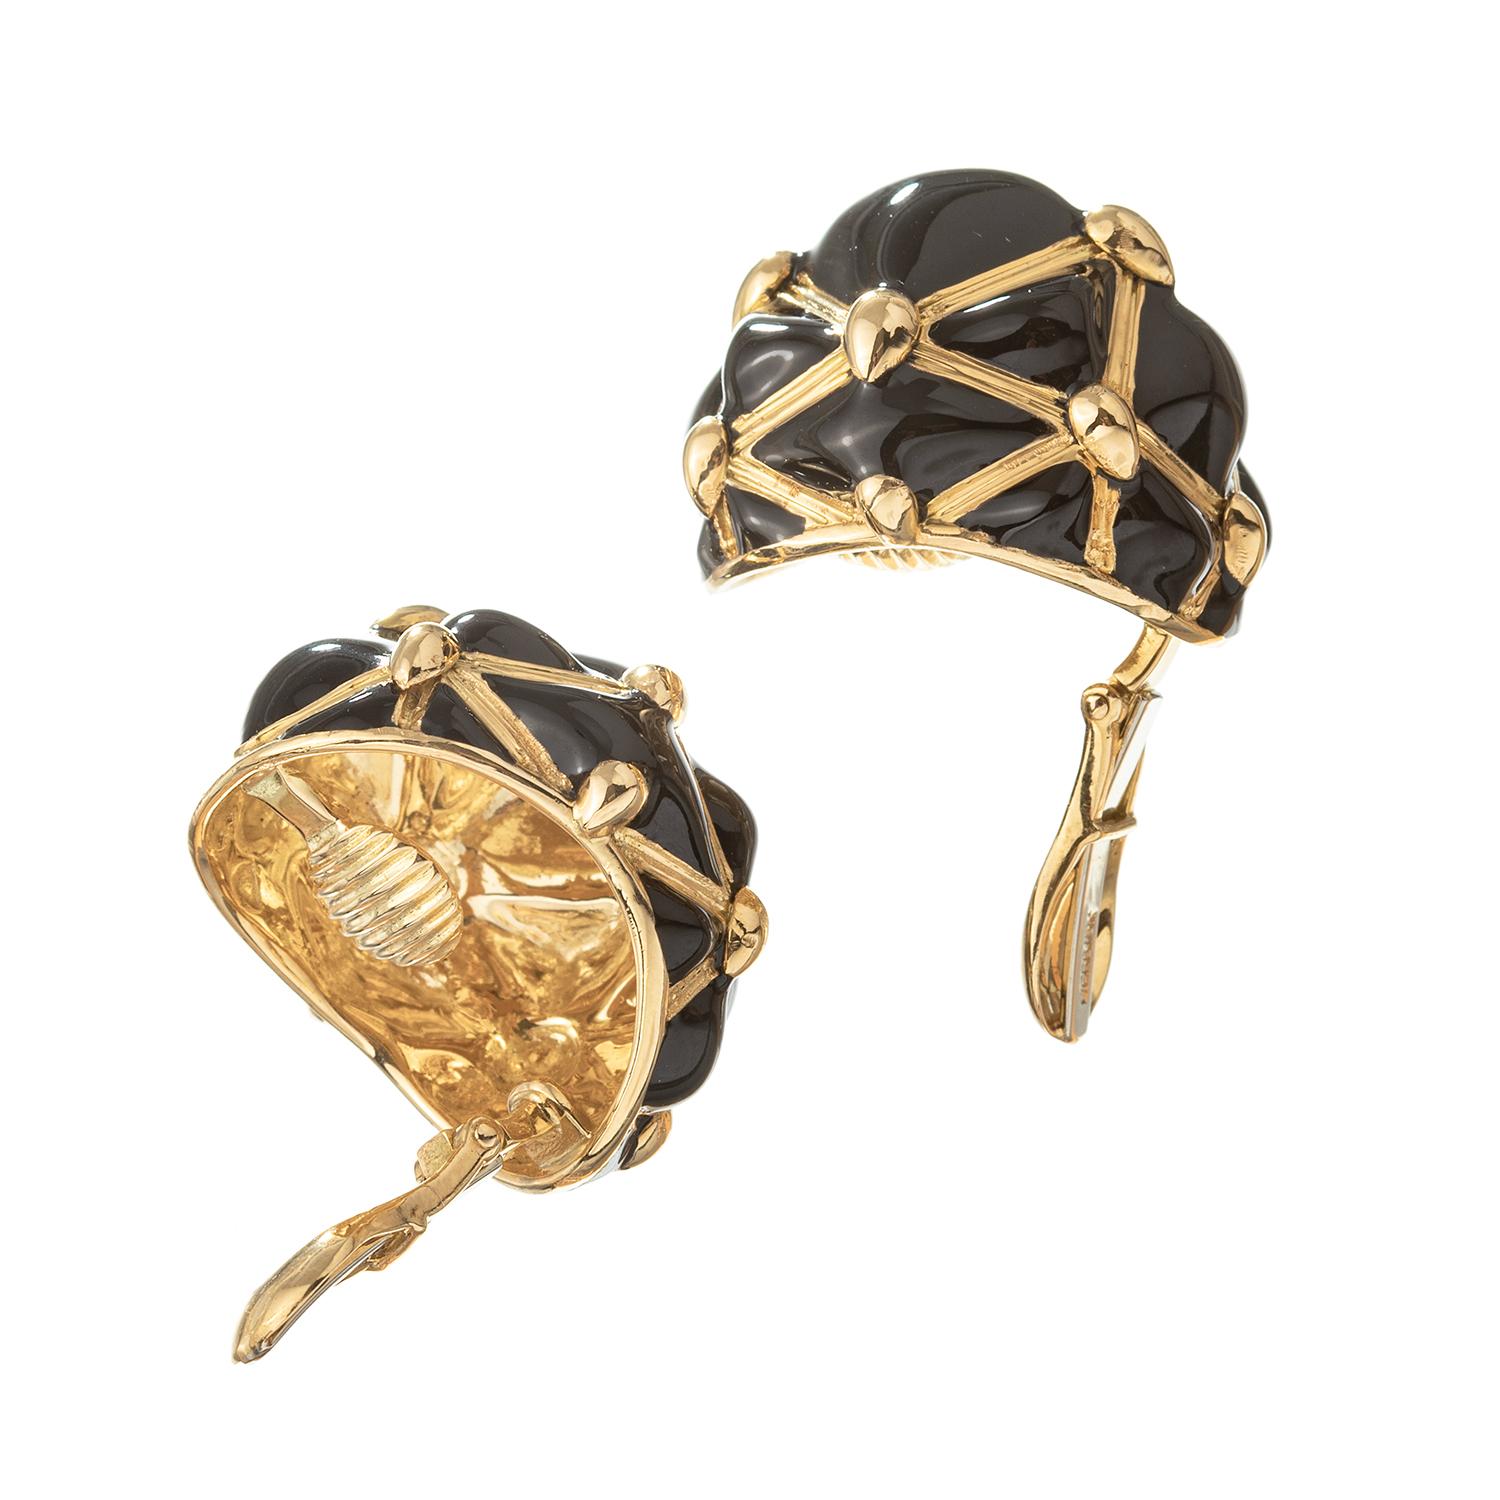 David Webb 18k yellow dome clip earrings with a trellis gold pattern with black enamel pyramid centers.  Clip backs signed 